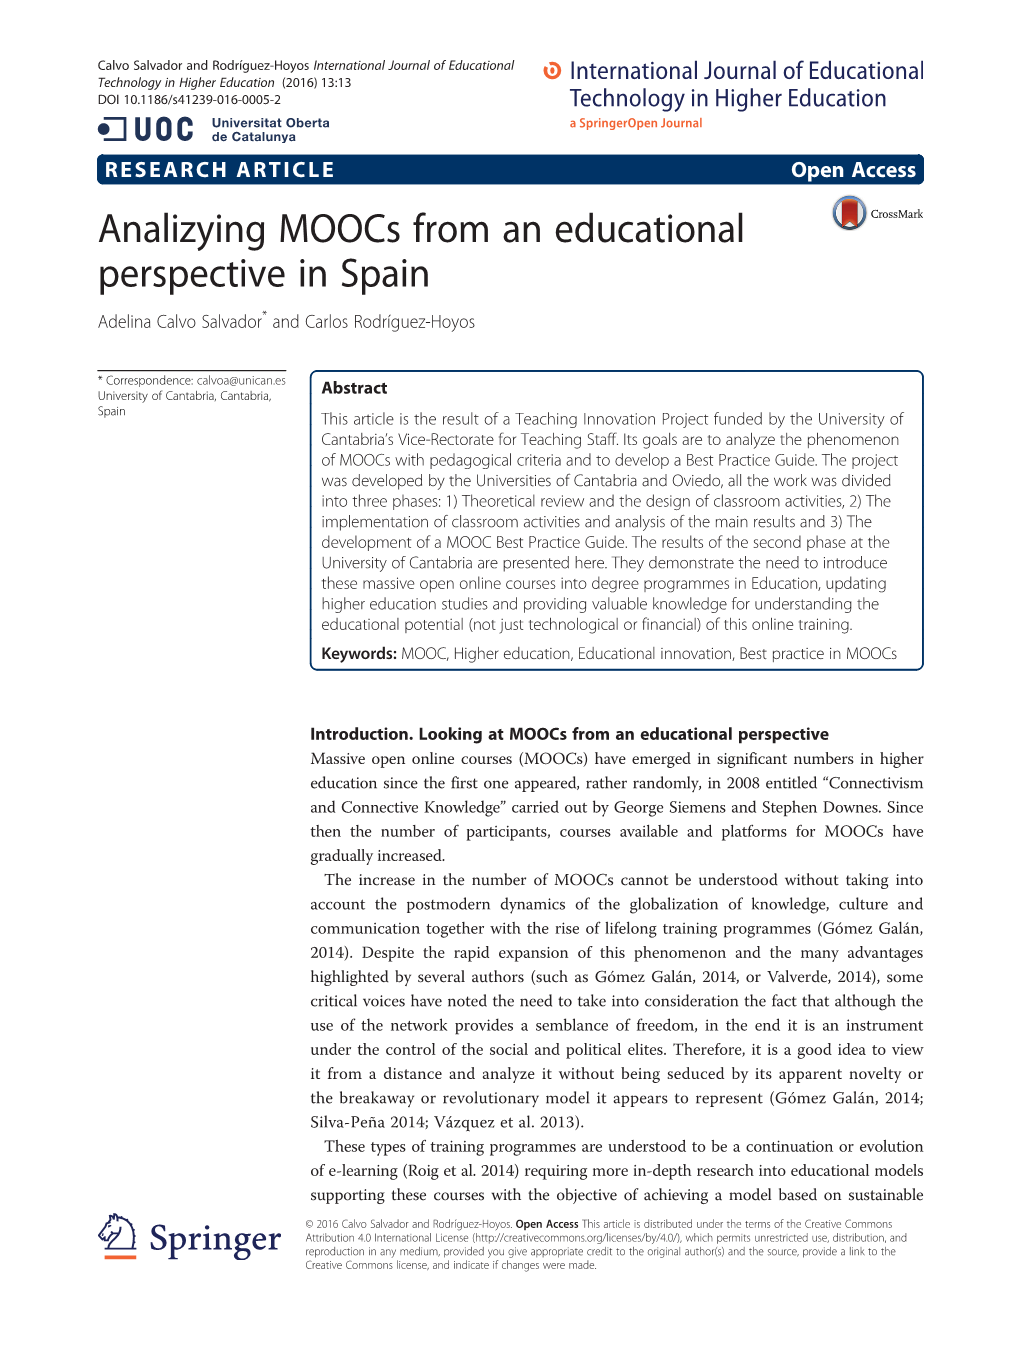 Analizying Moocs from an Educational Perspective in Spain Adelina Calvo Salvador* and Carlos Rodríguez-Hoyos